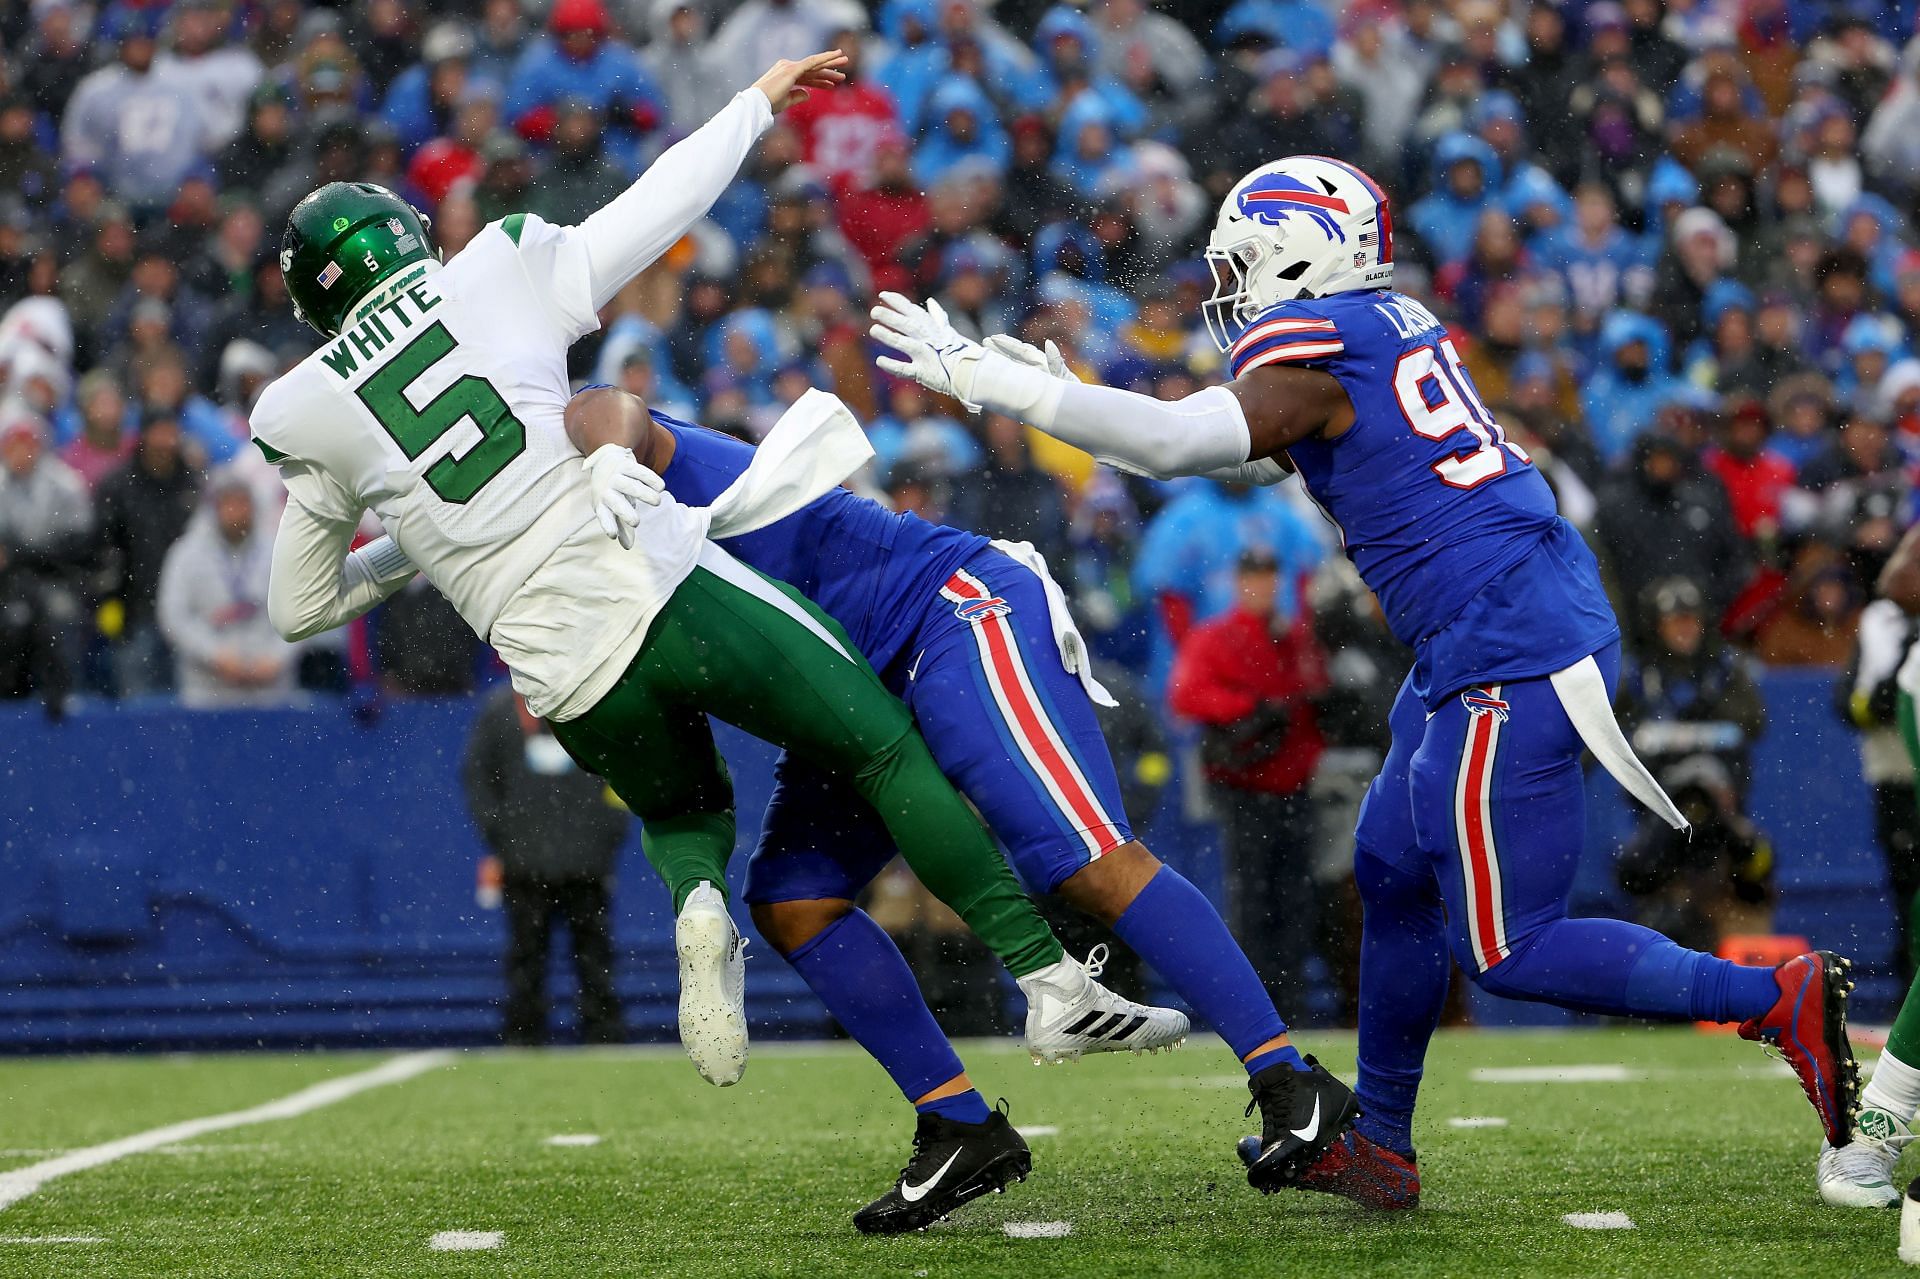 Mike White injured: What happened to Jets QB?